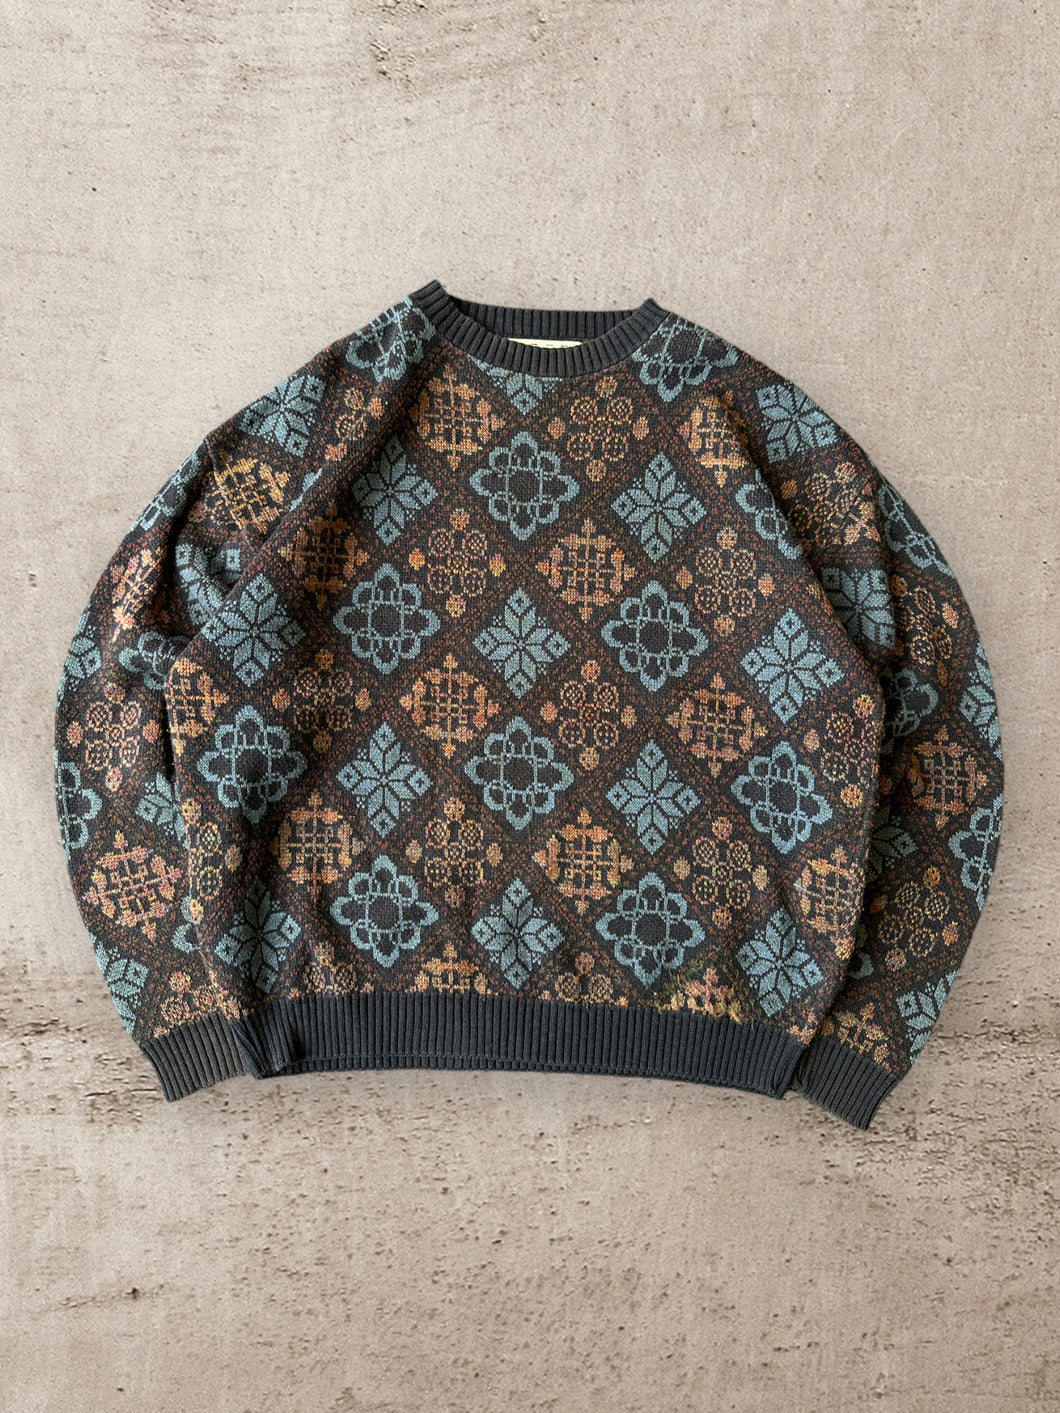 90s Patterned Knit Sweater - XL